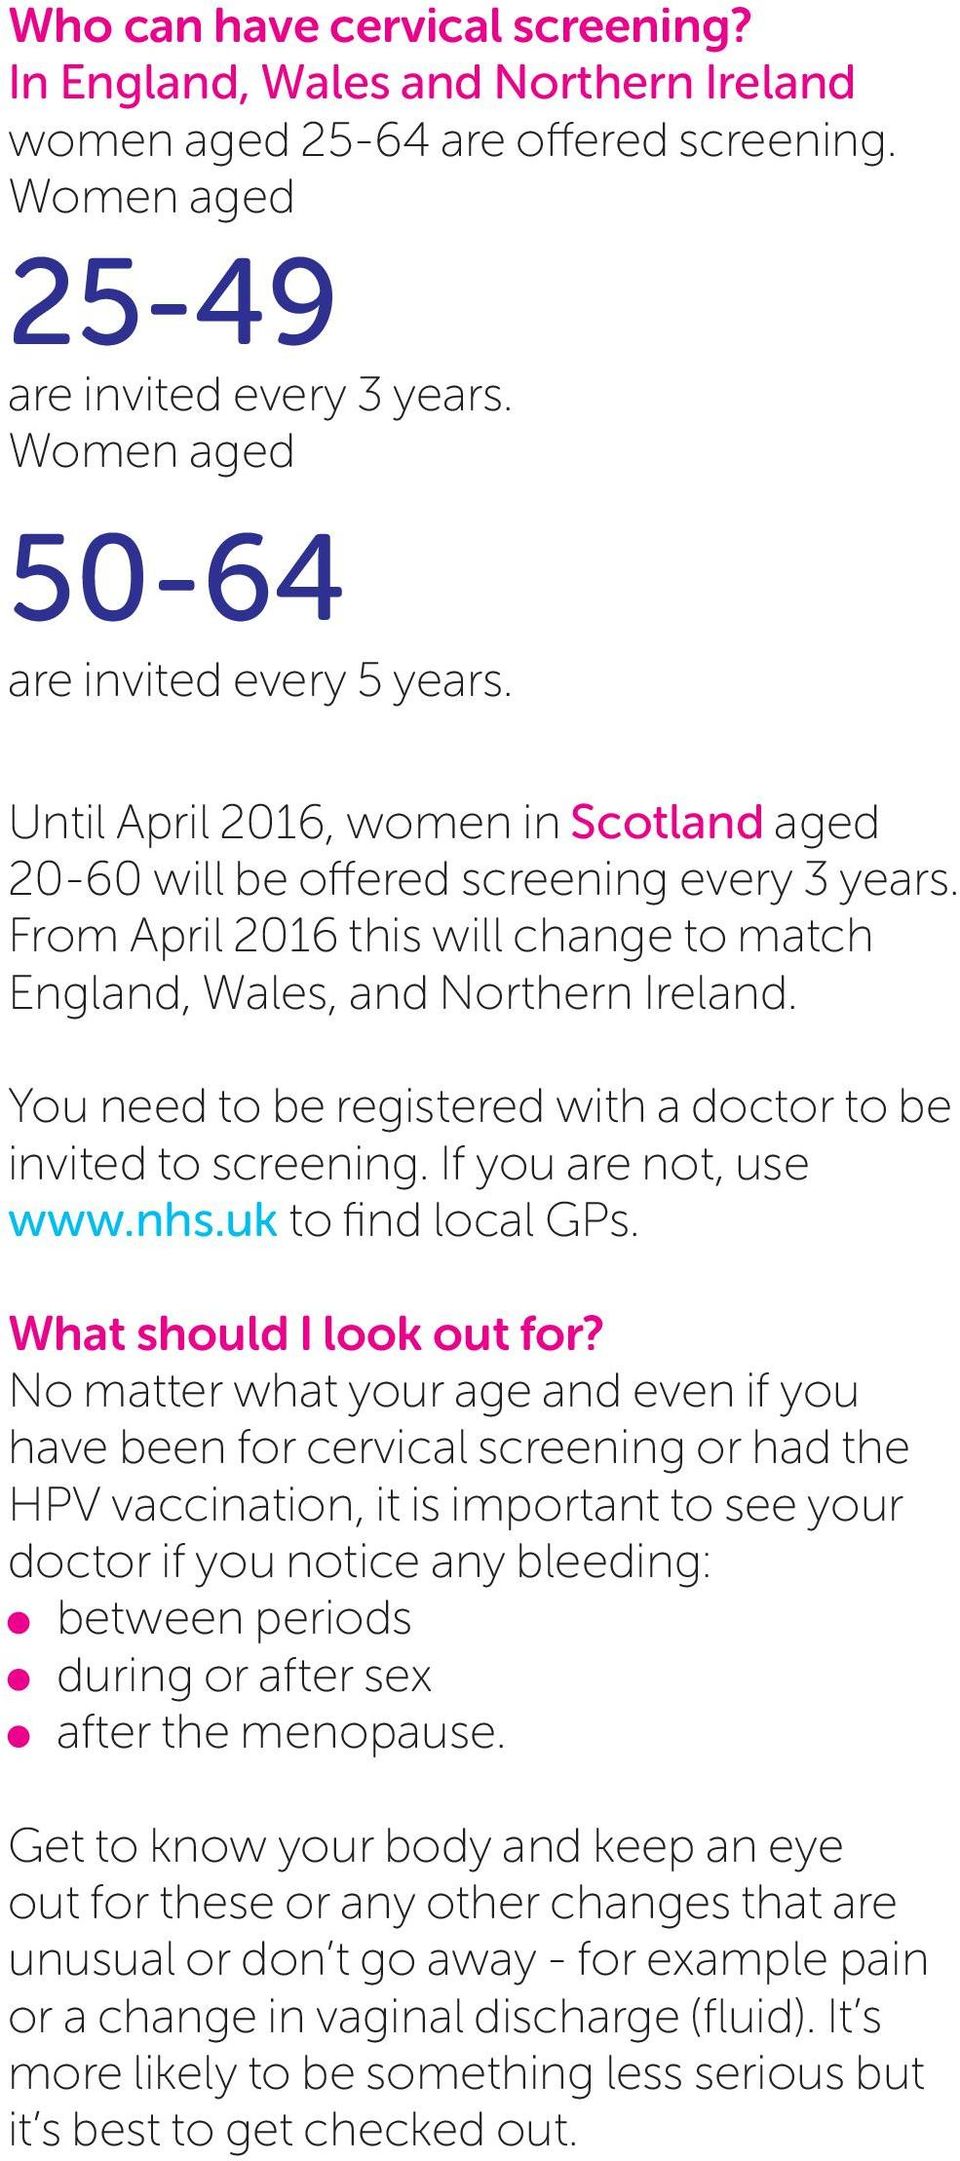 You need to be registered with a doctor to be invited to screening. If you are not, use www.nhs.uk to find local GPs. What should I look out for?